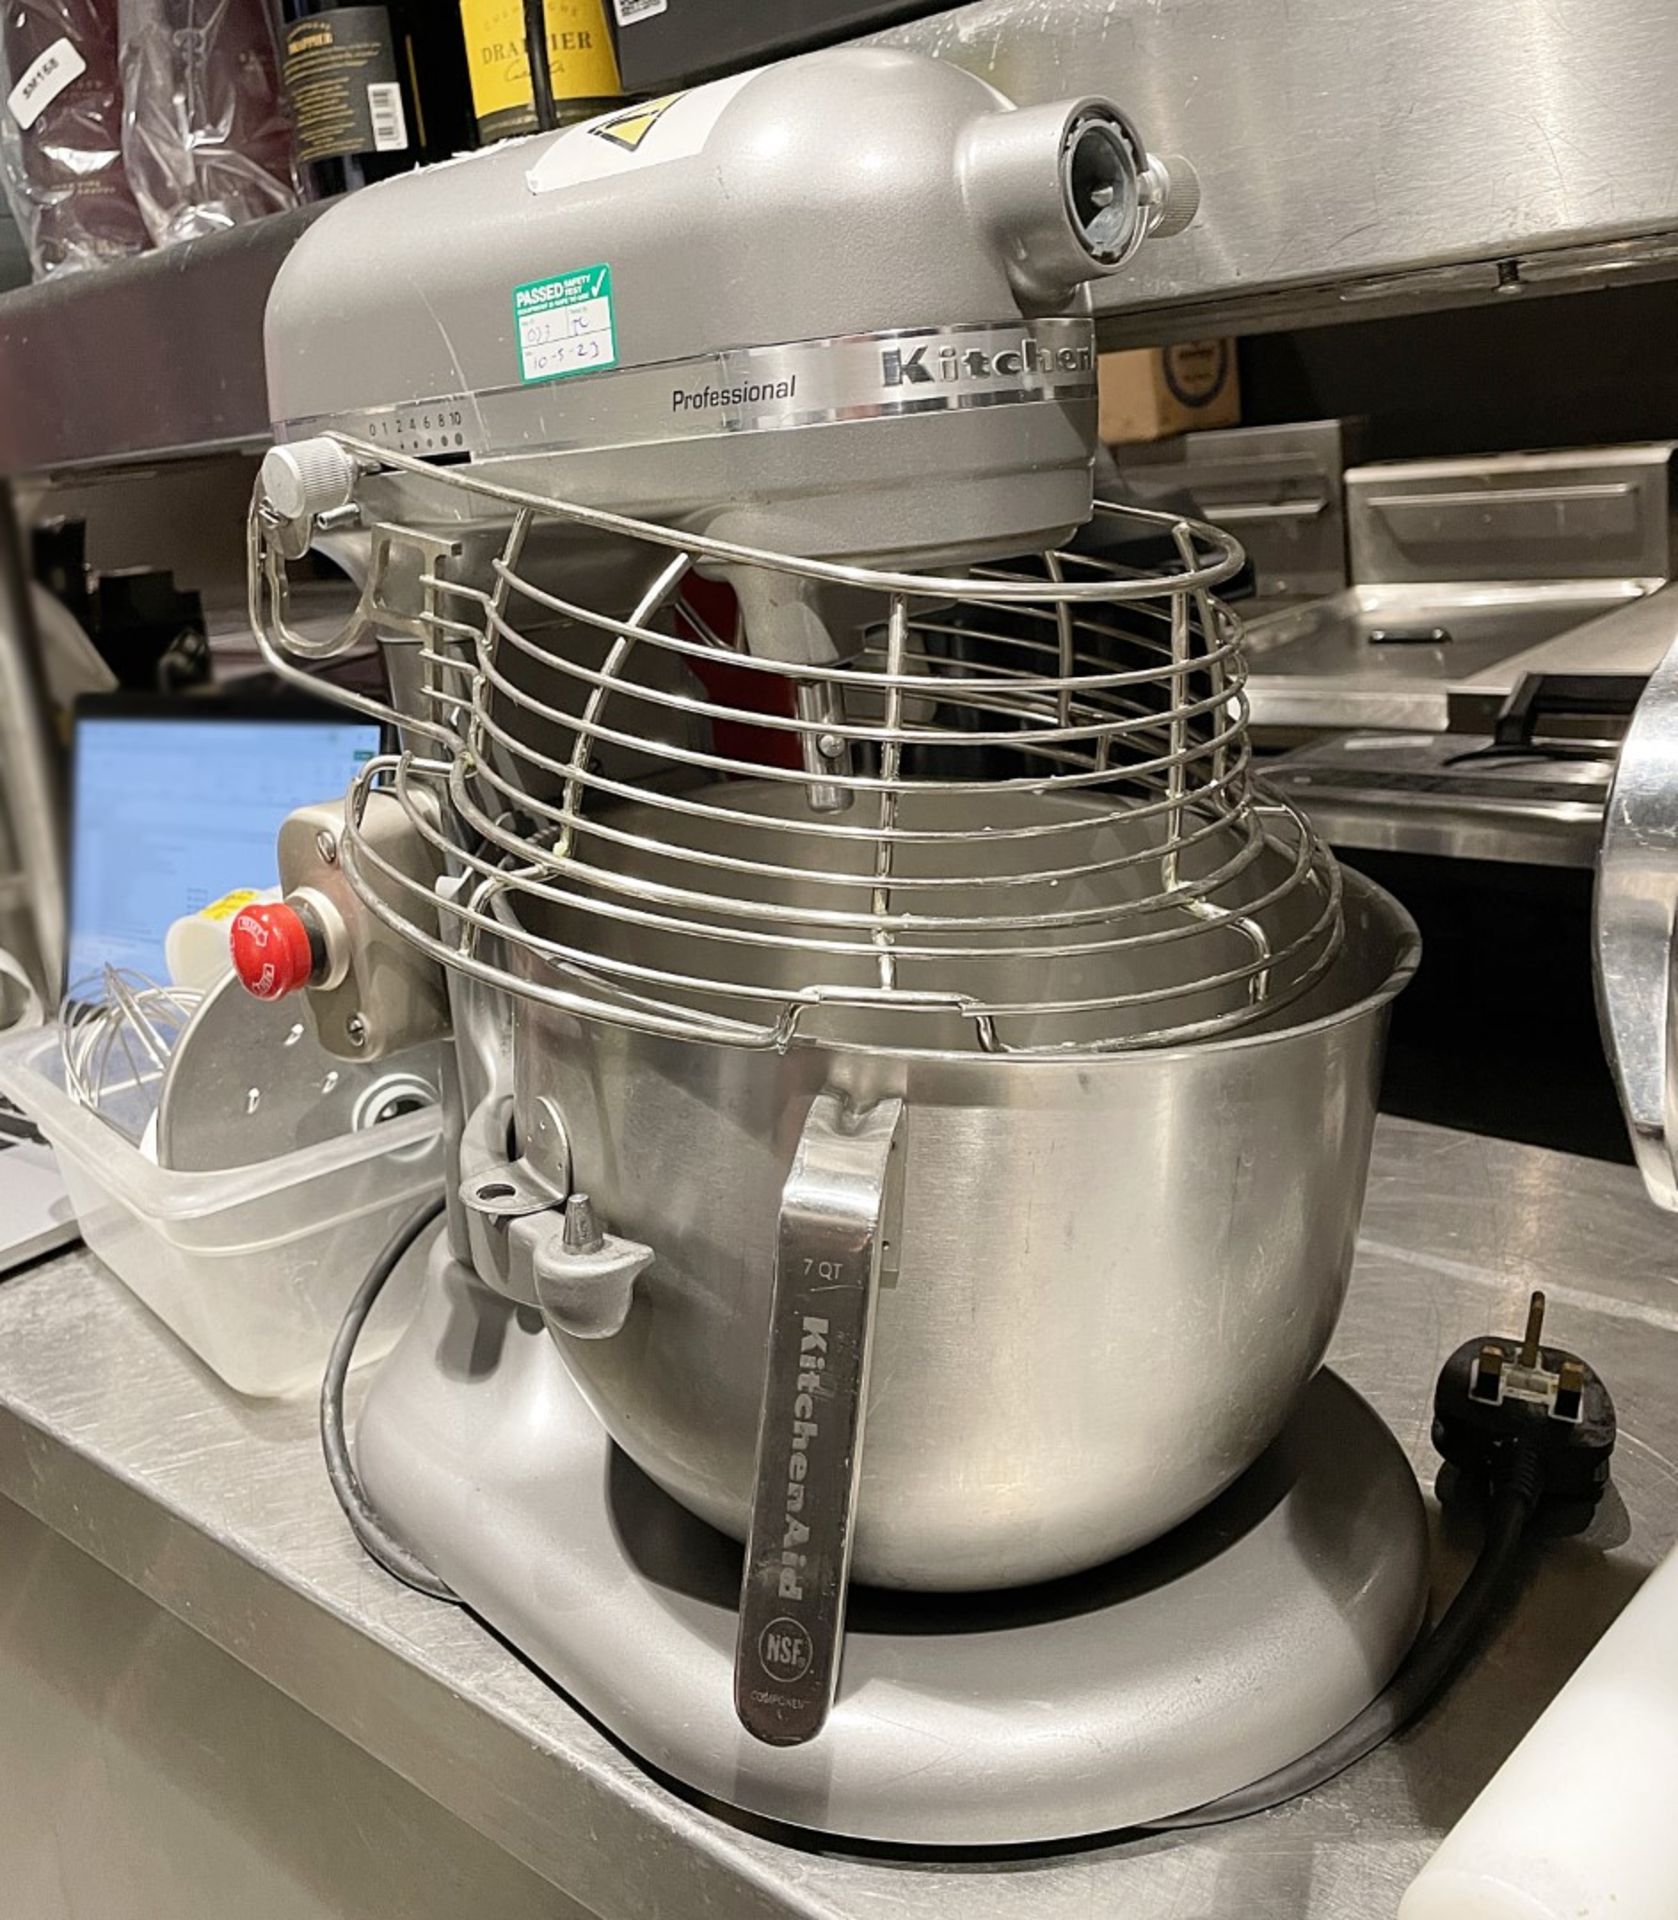 1 x Kitchenaid 6.9 Ltr Commercial Planetary Food Mixer - Model 5KSM7990XBSL - Includes Mixing Bowl - Image 12 of 16